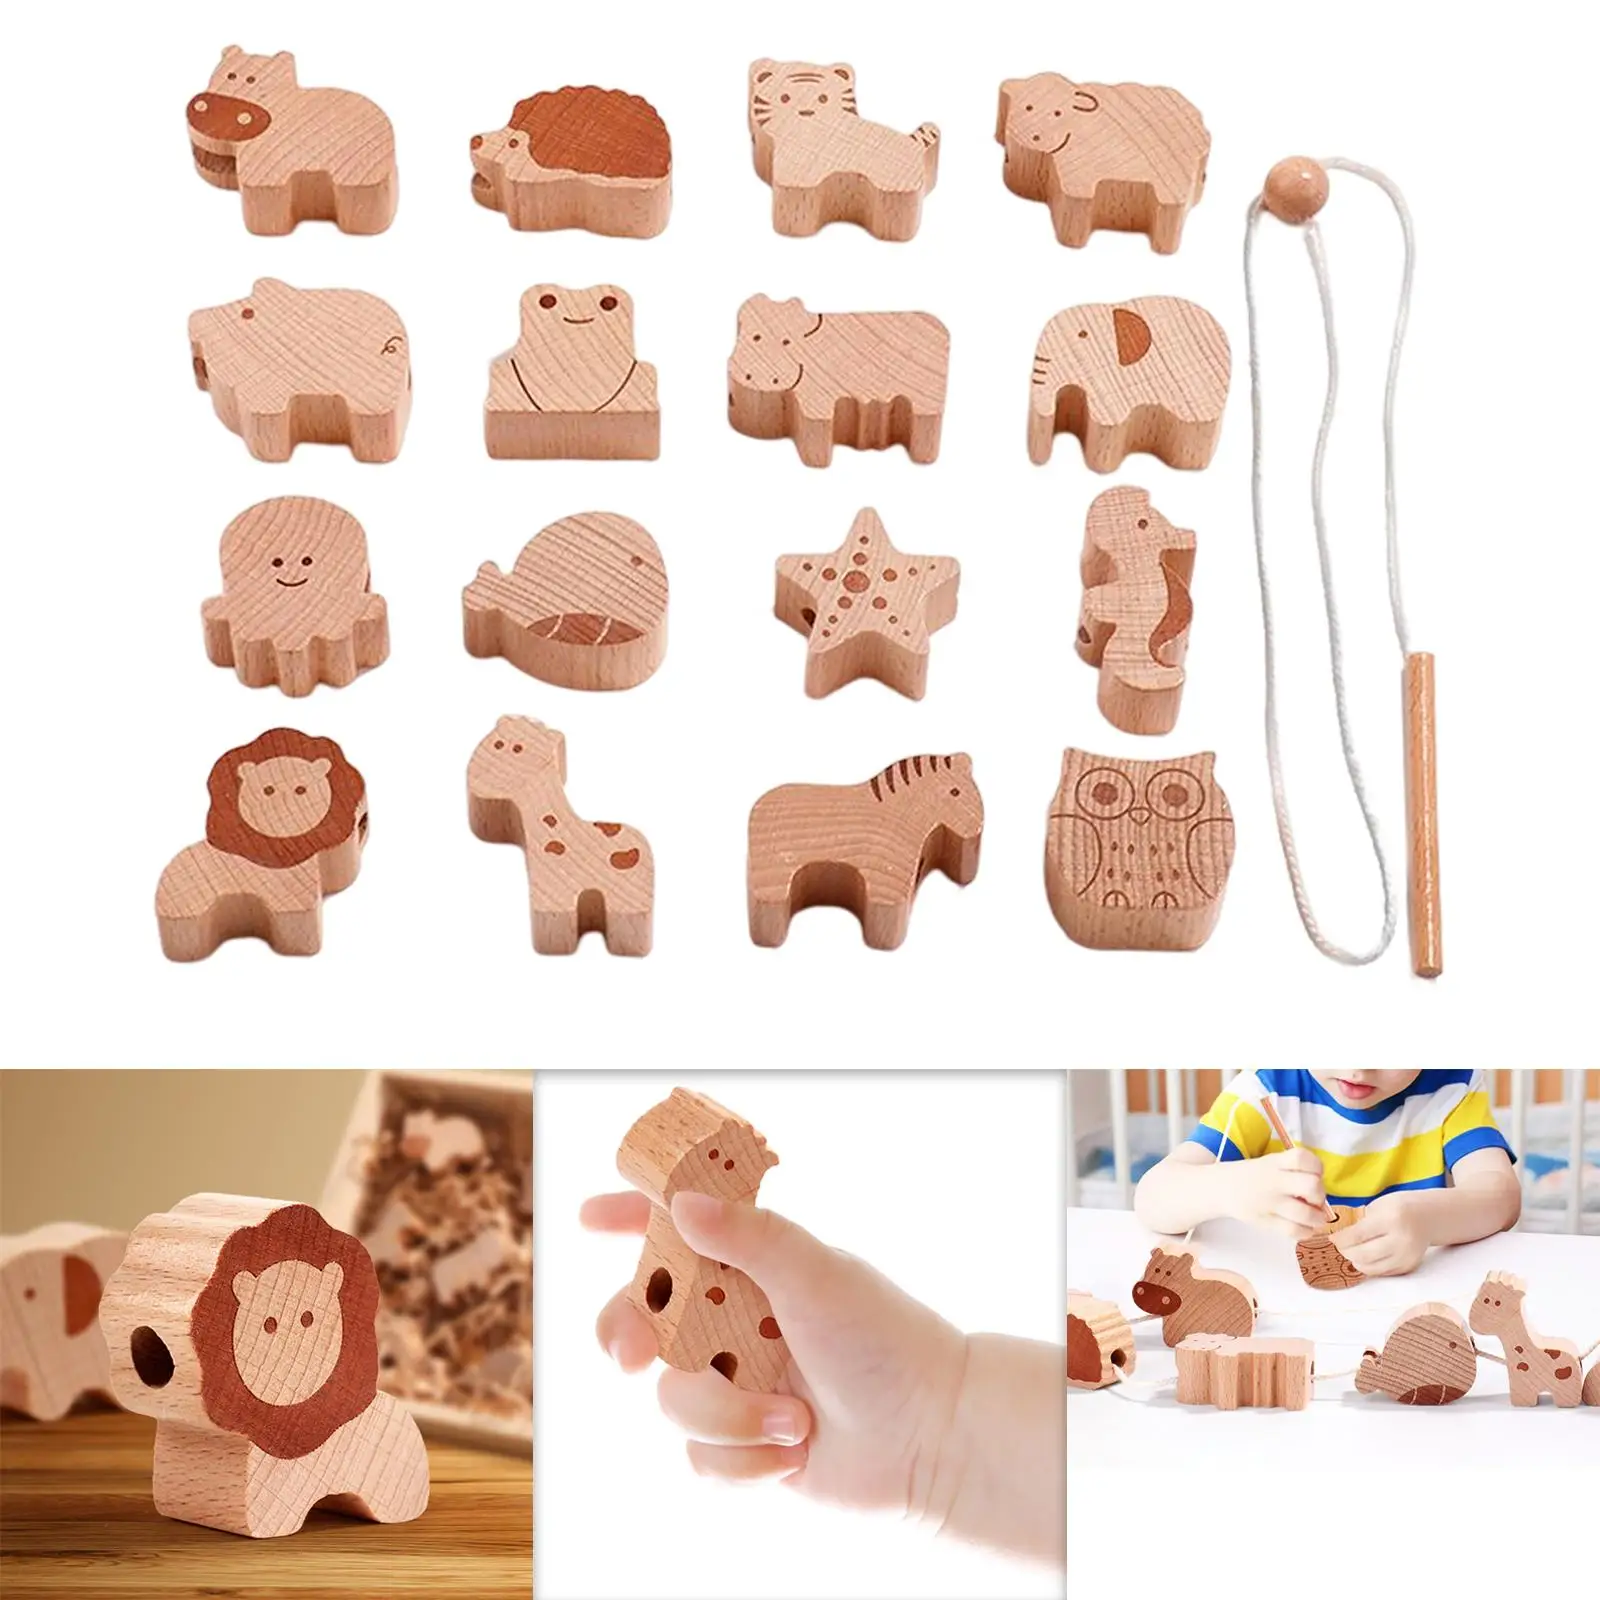 16 Pieces Animal Blocks Threading Toy Wooden Stacker Game for Birthday Gift